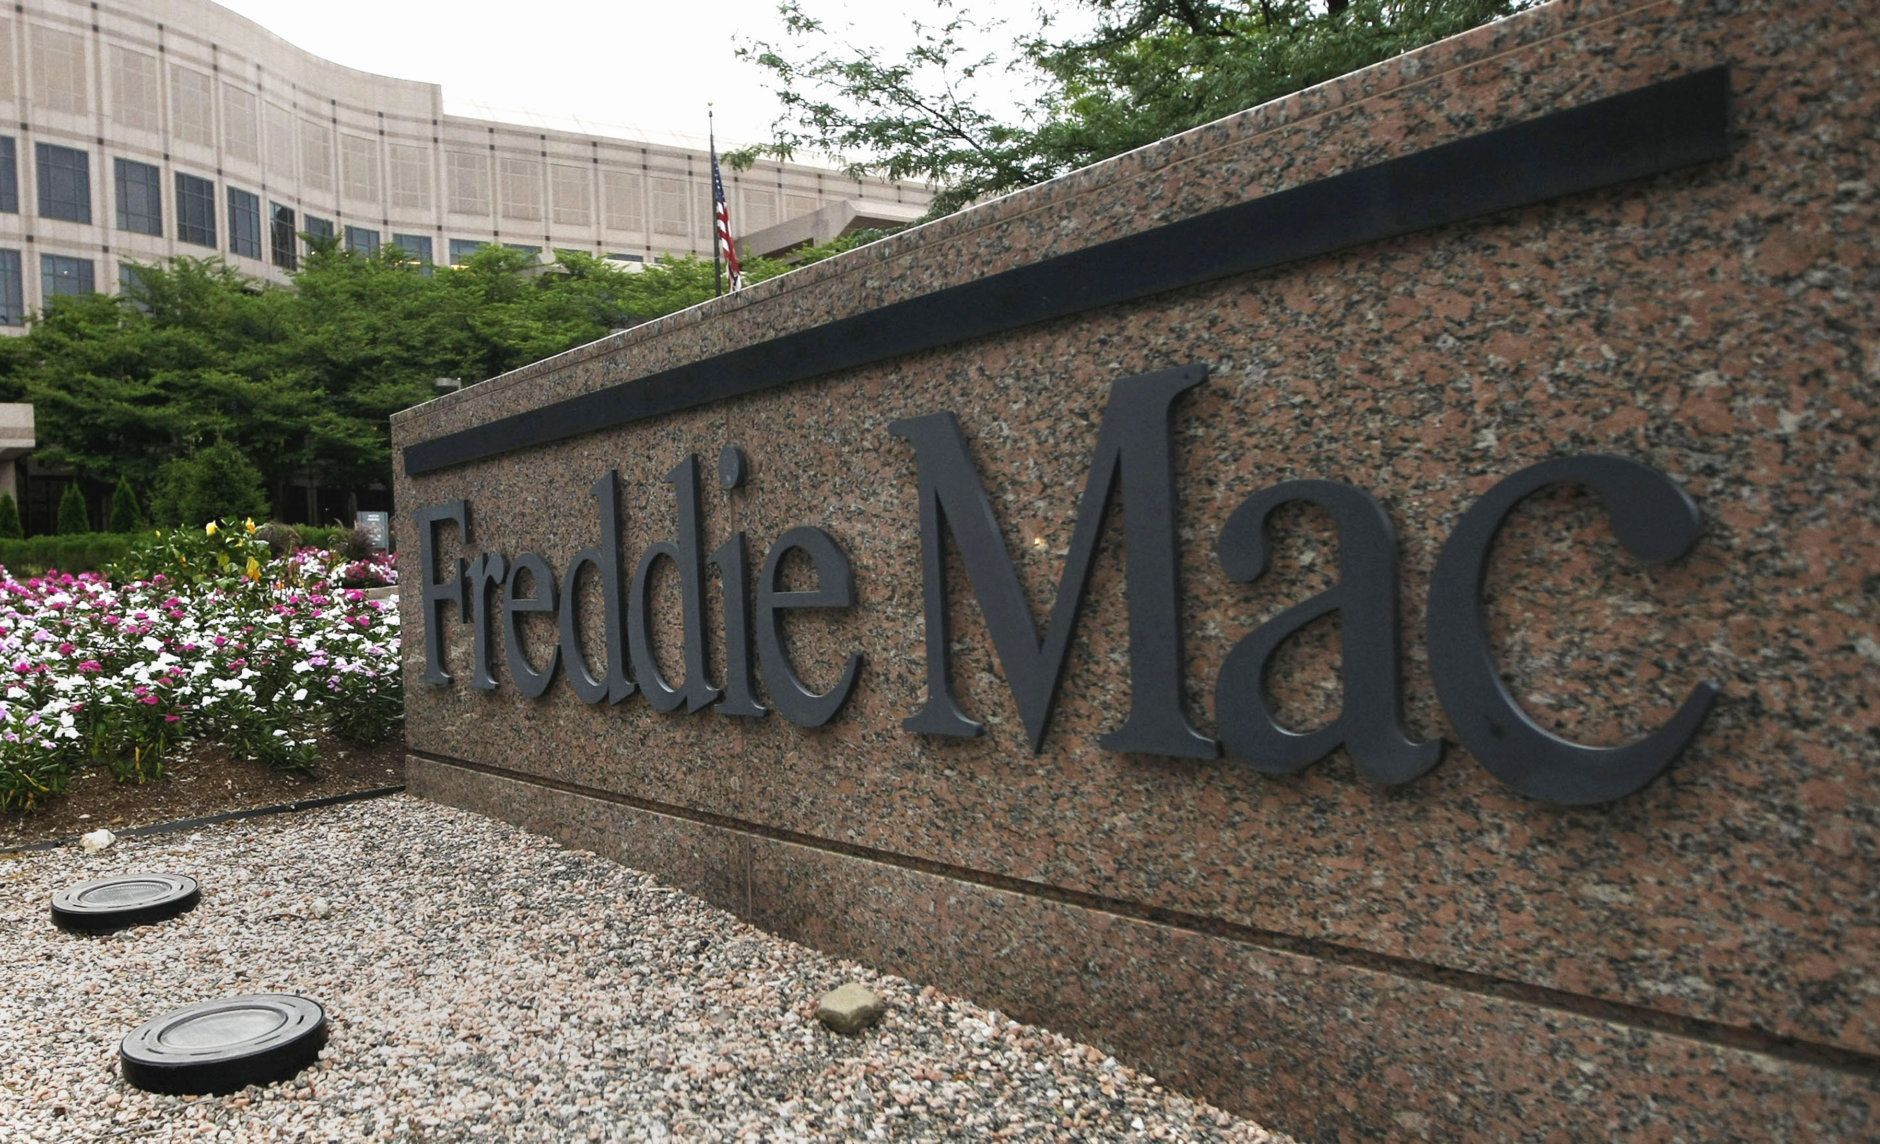 FILE -  In this July 13, 2008 file photo, the Freddie Mac's corporate offices are seen in McLean, Va. Shutting down Fannie Mae and Freddie Mac should fit seamlessly into the Republican drive to shrink government. After all, it has cost taxpayers $150 billion to keep the ailing mortgage giants afloat and many in both parties would rather let the private sector handle their role in financing the nations $11.3 trillion residential mortgage market.  (AP Photo/Pablo Martinez Monsivais, File)